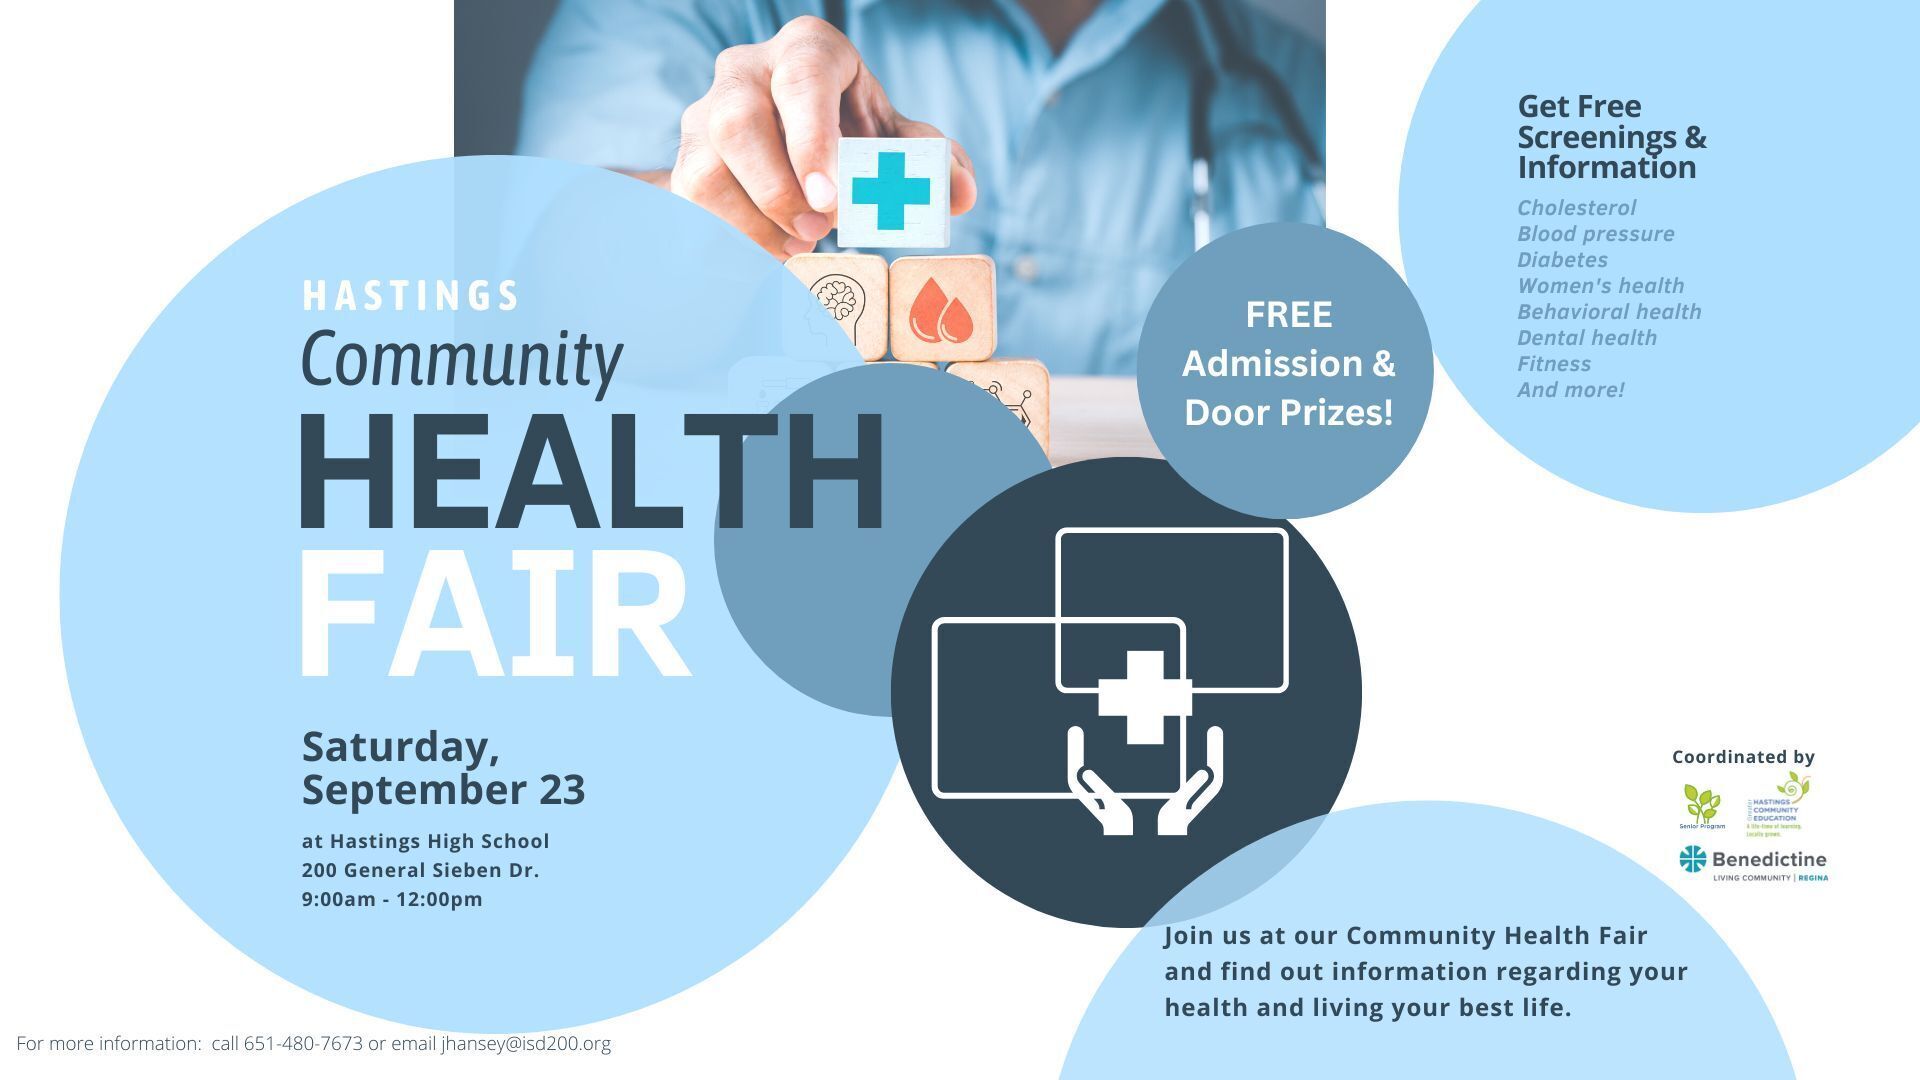 Hand building a pyramid of blocks with a cross icon, blood icon, brain icon, words "Hastings Community Health Fair, Saturday, Sept 23, Hastings High School, 9am to noon, get free screenings and info, free admission and prize drawings, call 651-480-7673 fo